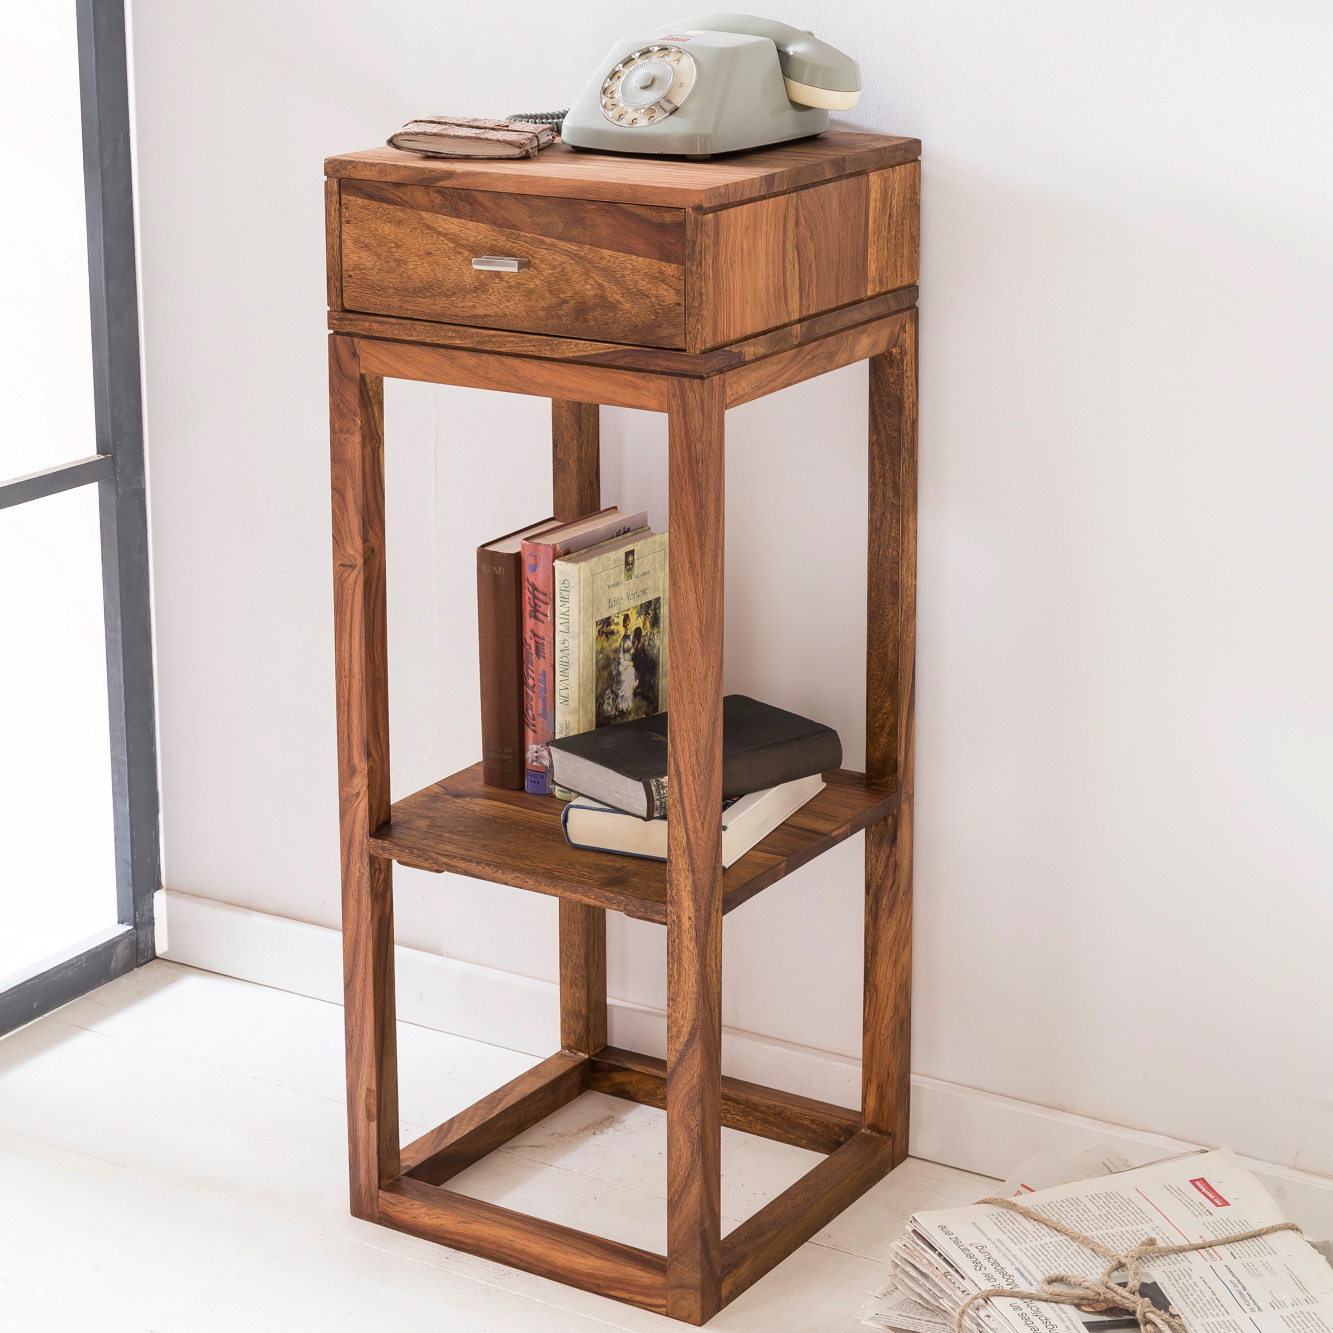 Table Solid Wood Sheesham Anstelltisch Telephone Table With Drawers 35 X 35 X 90 Cm ArtKomfort